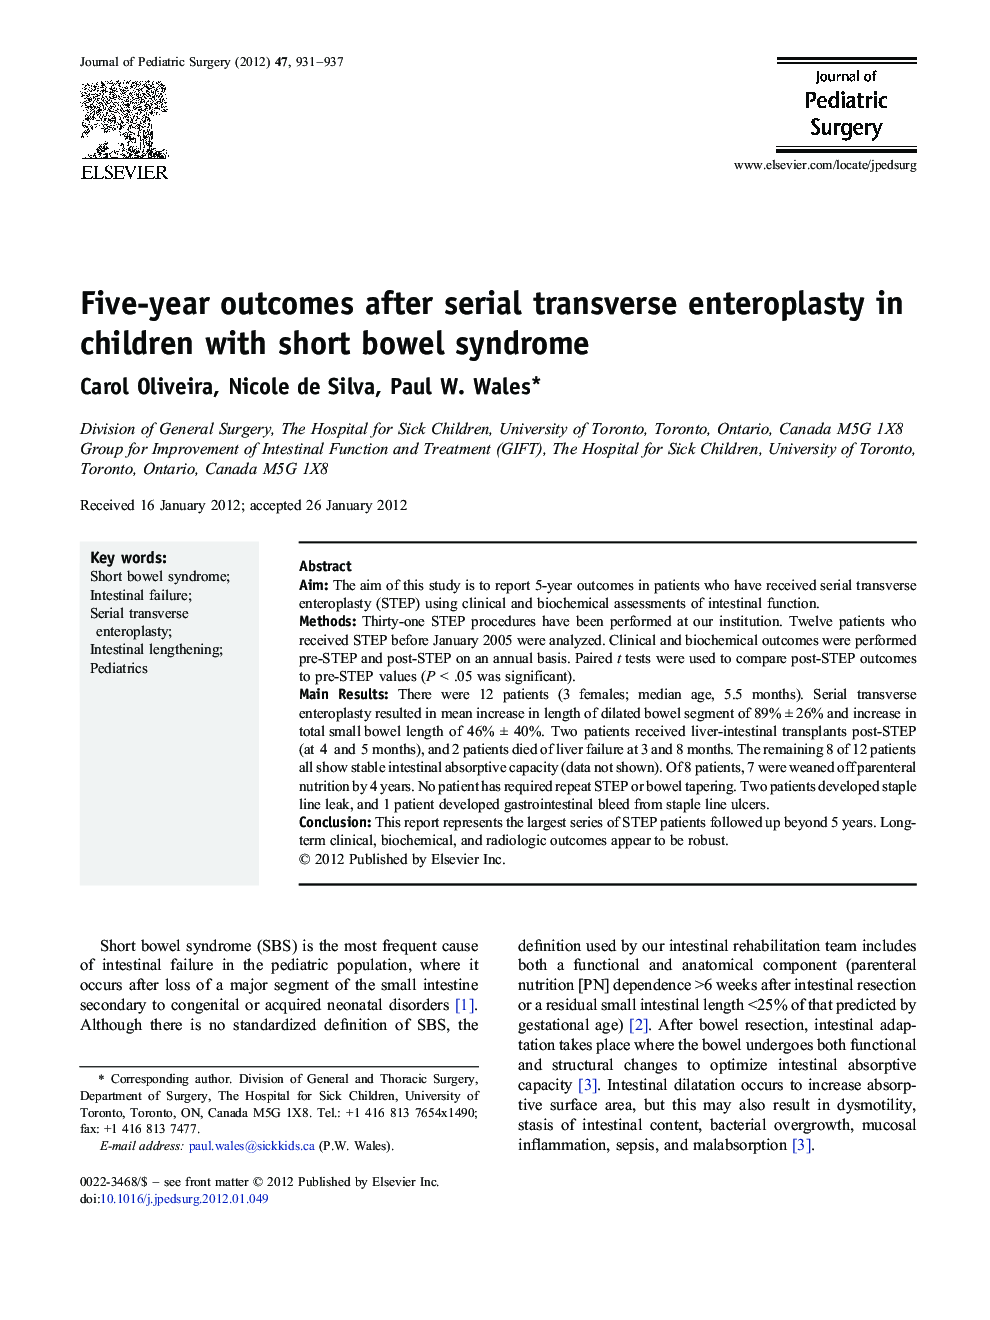 Five-year outcomes after serial transverse enteroplasty in children with short bowel syndrome